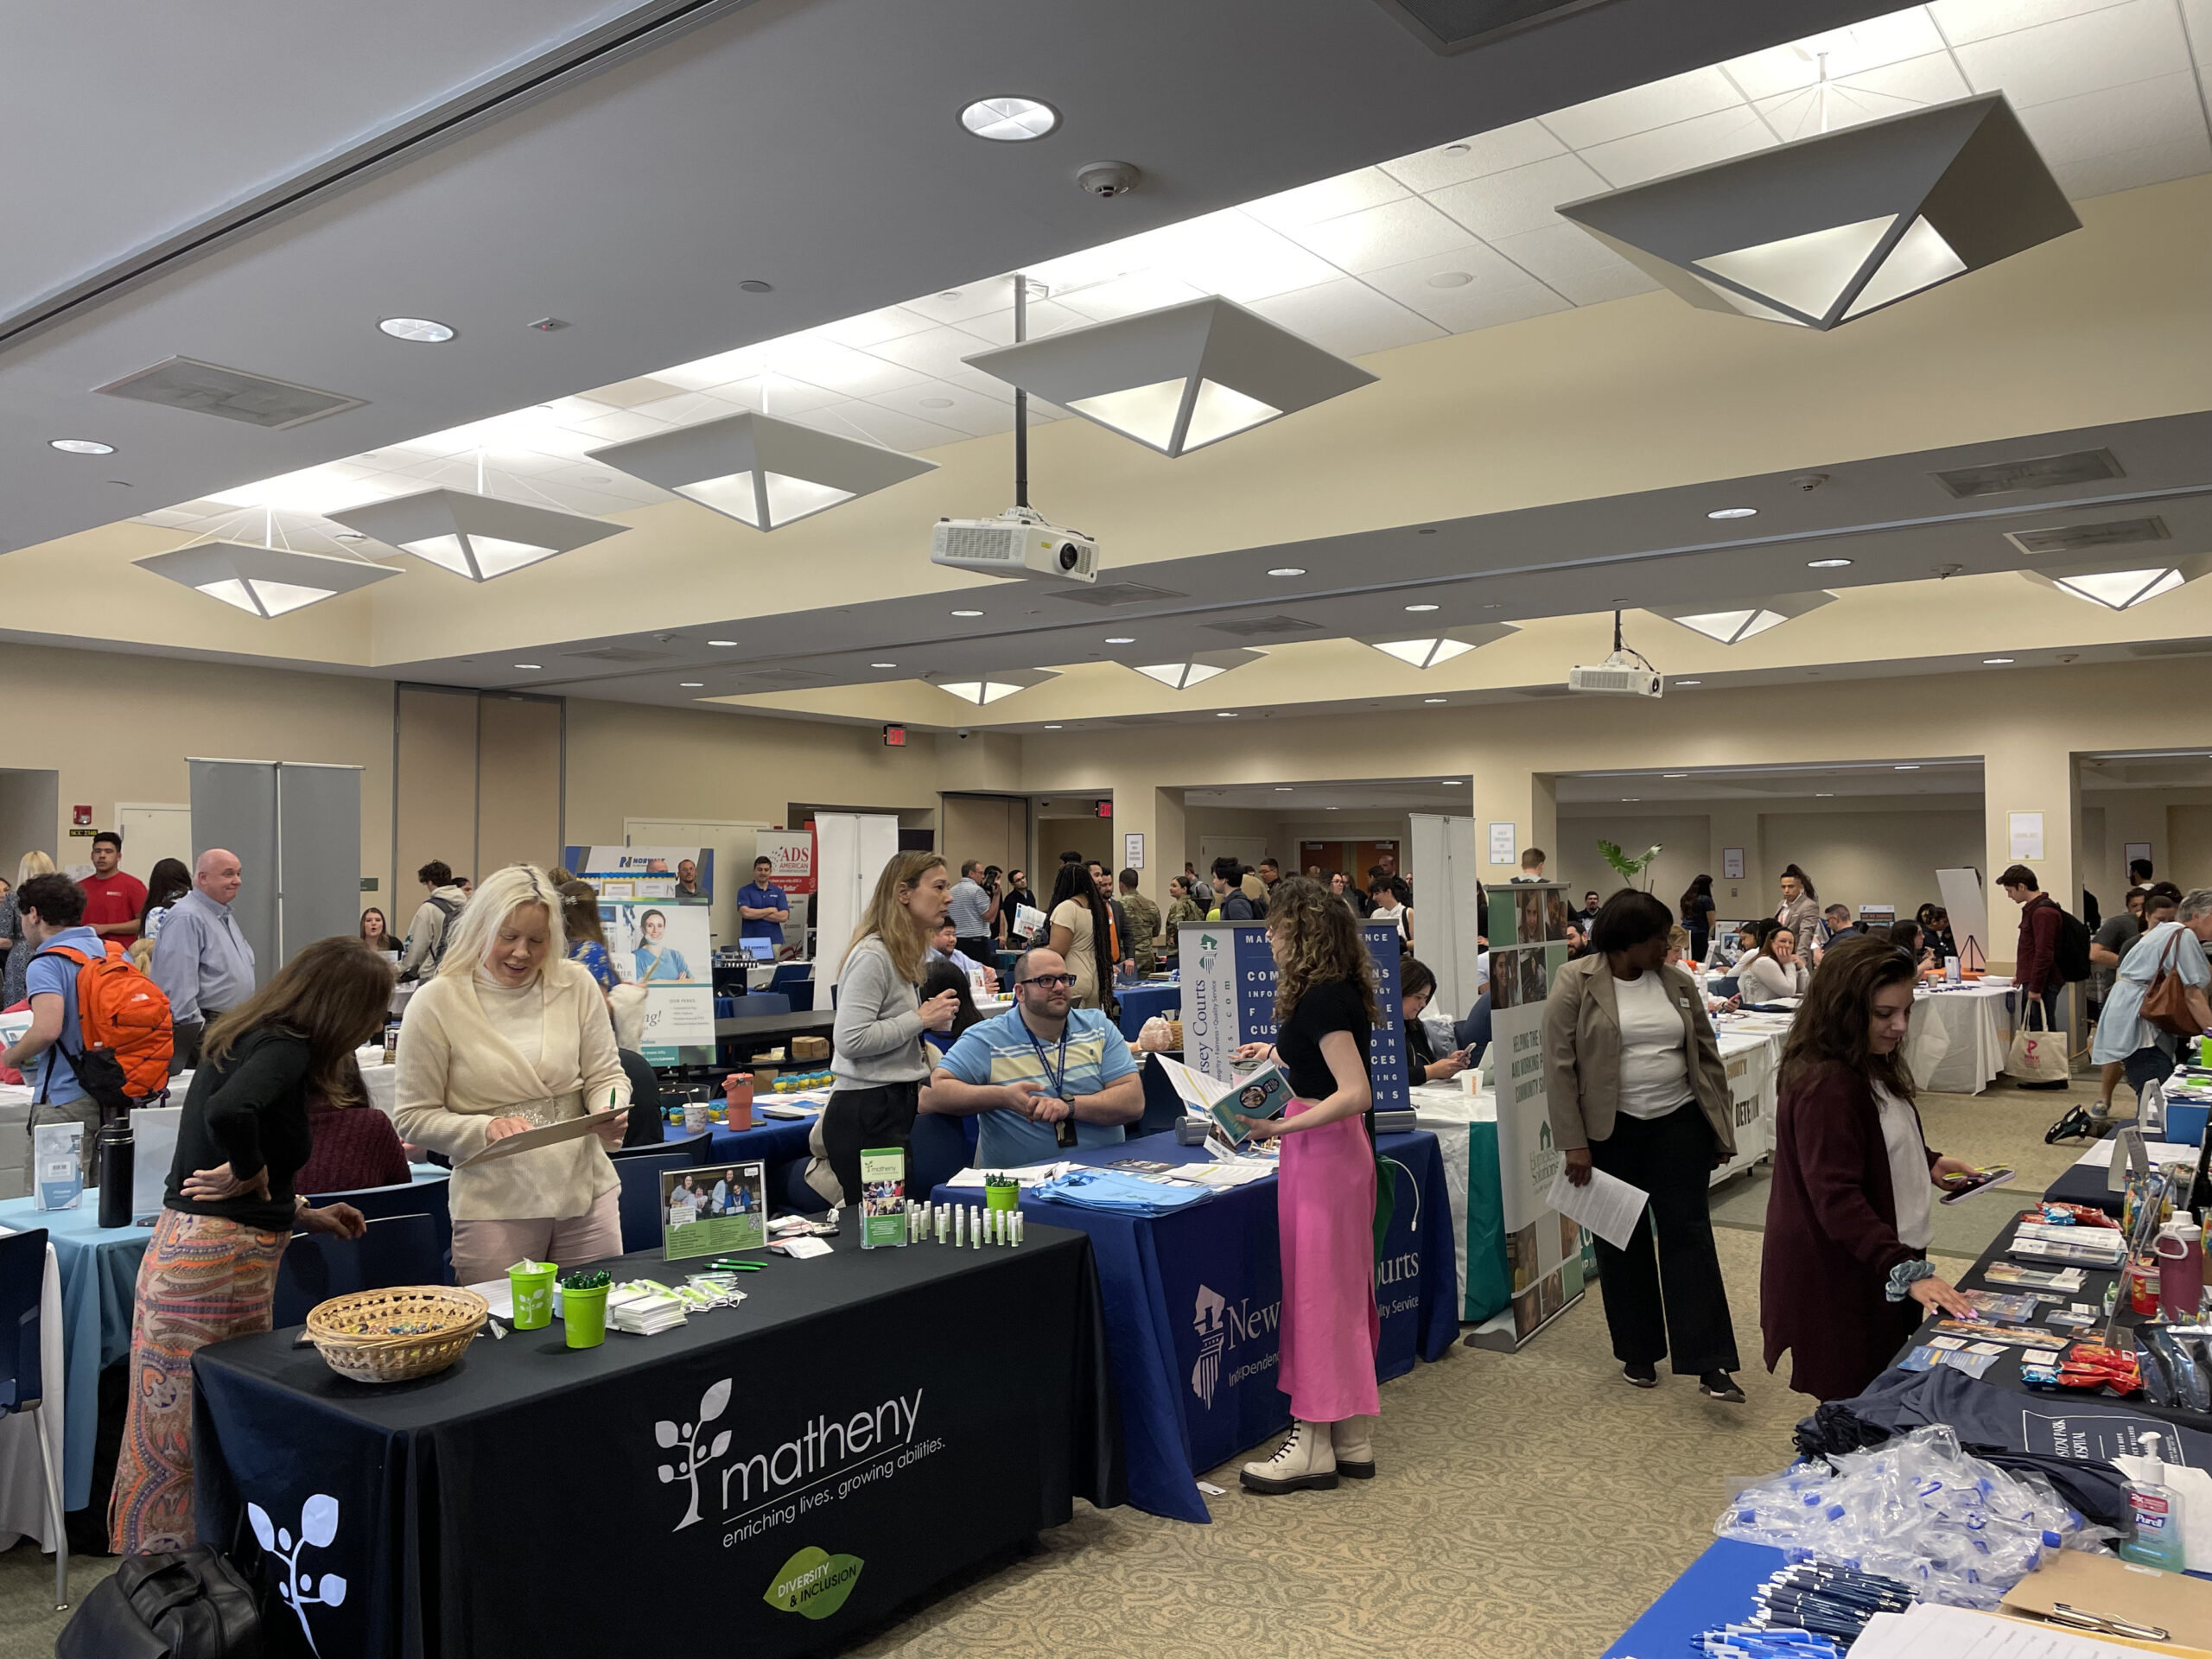 CCM Offers Free “Careers in the Health Professions” Showcase on November 16